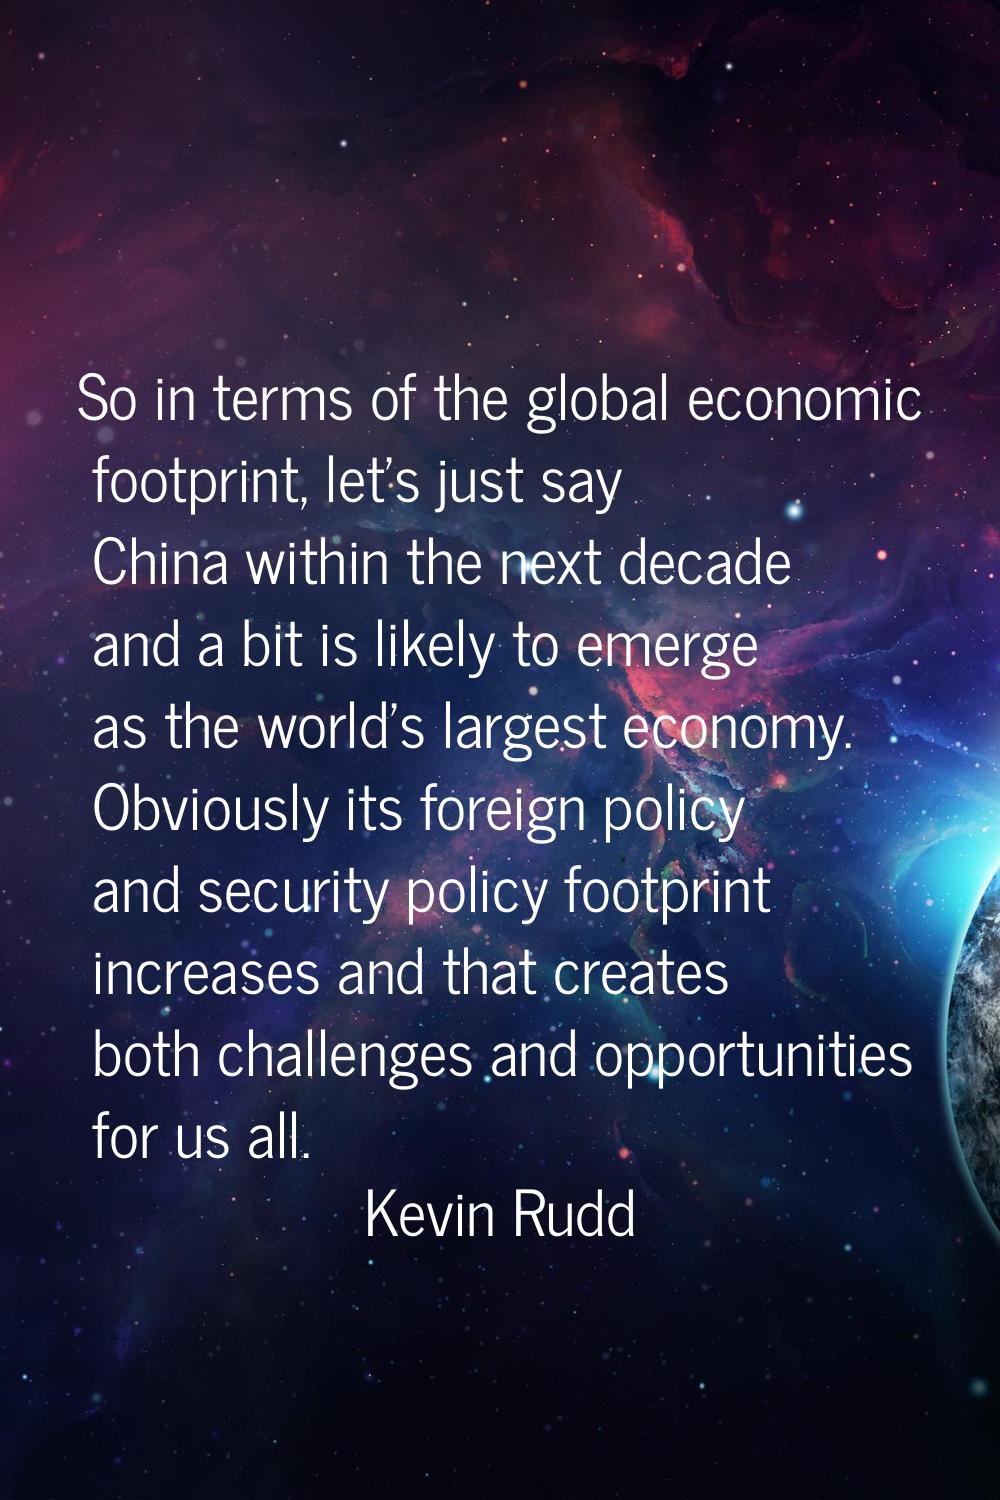 So in terms of the global economic footprint, let's just say China within the next decade and a bit